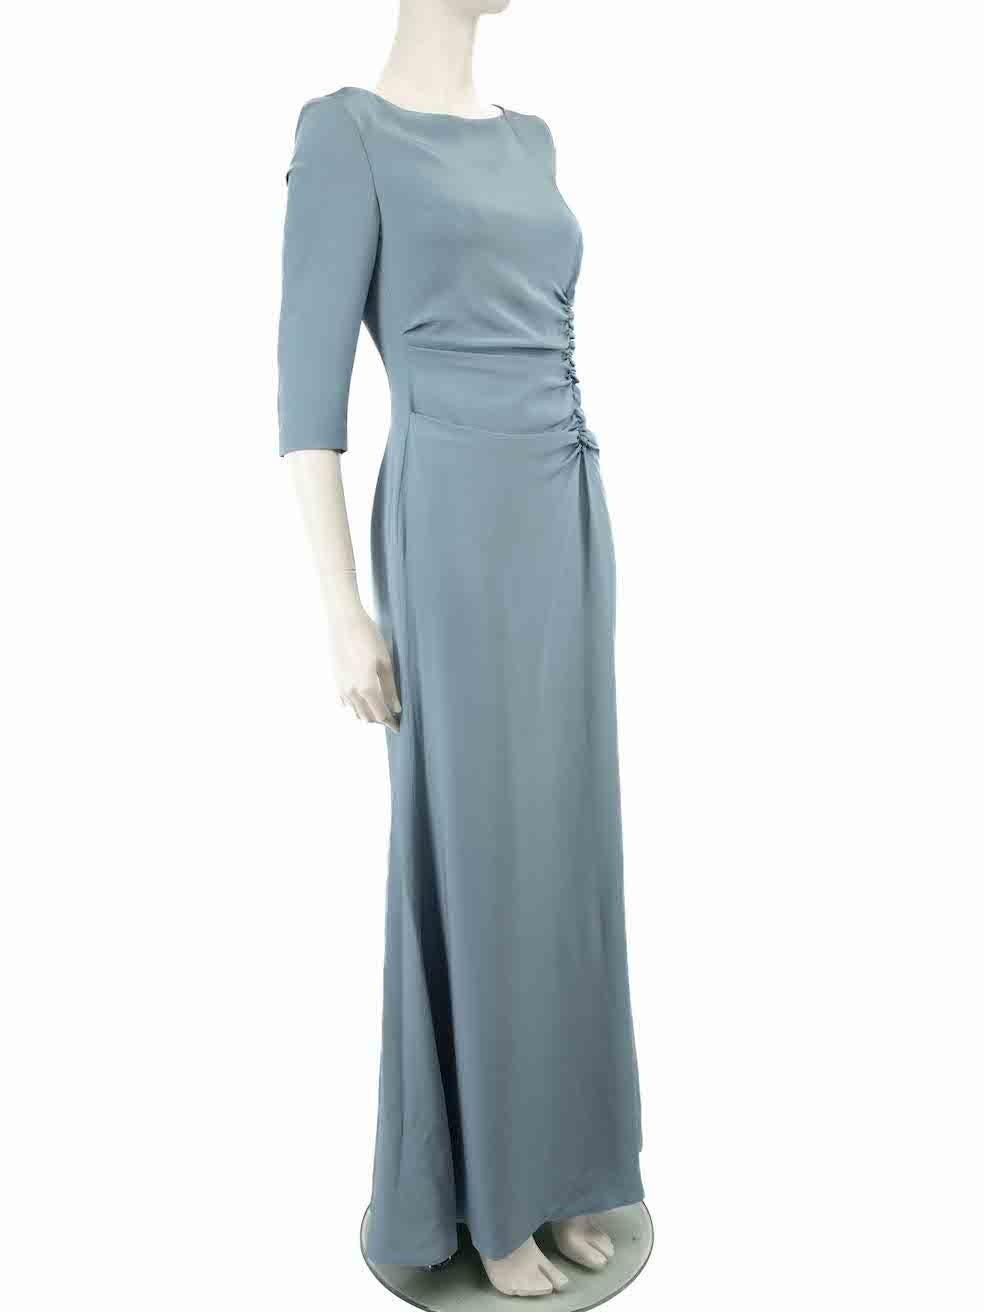 CONDITION is Very good. Minimal wear to dress is evident. Minimal wear to the composition with a handful of small plucks to the stitching seen inside the neck and hemlines on this used Oscar de la Renta designer resale item.
 
 
 
 Details
 
 
